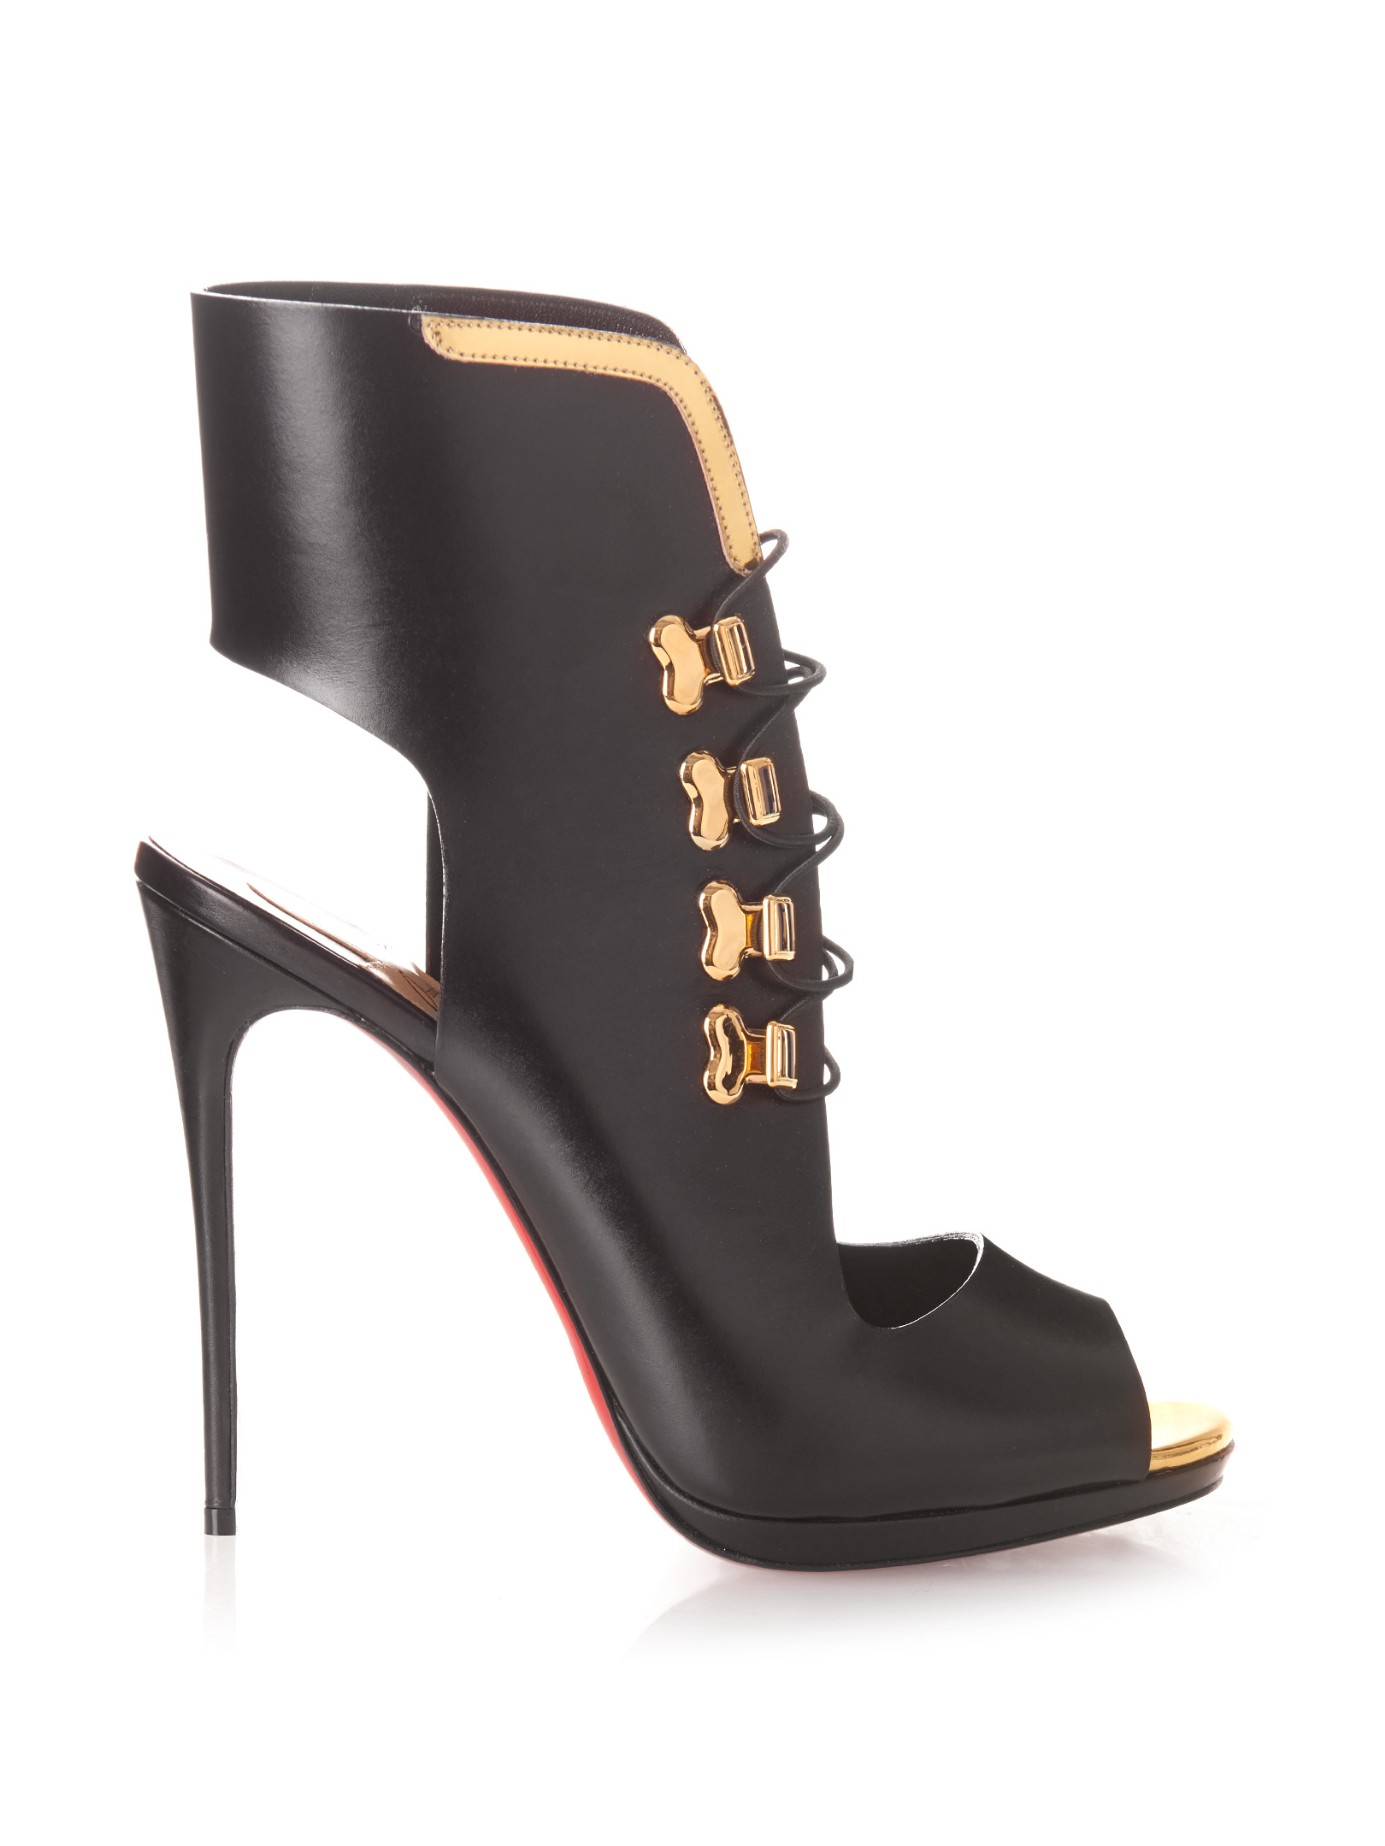 Christian louboutin Troubida Cut-Out Leather Sandals in Black | Lyst